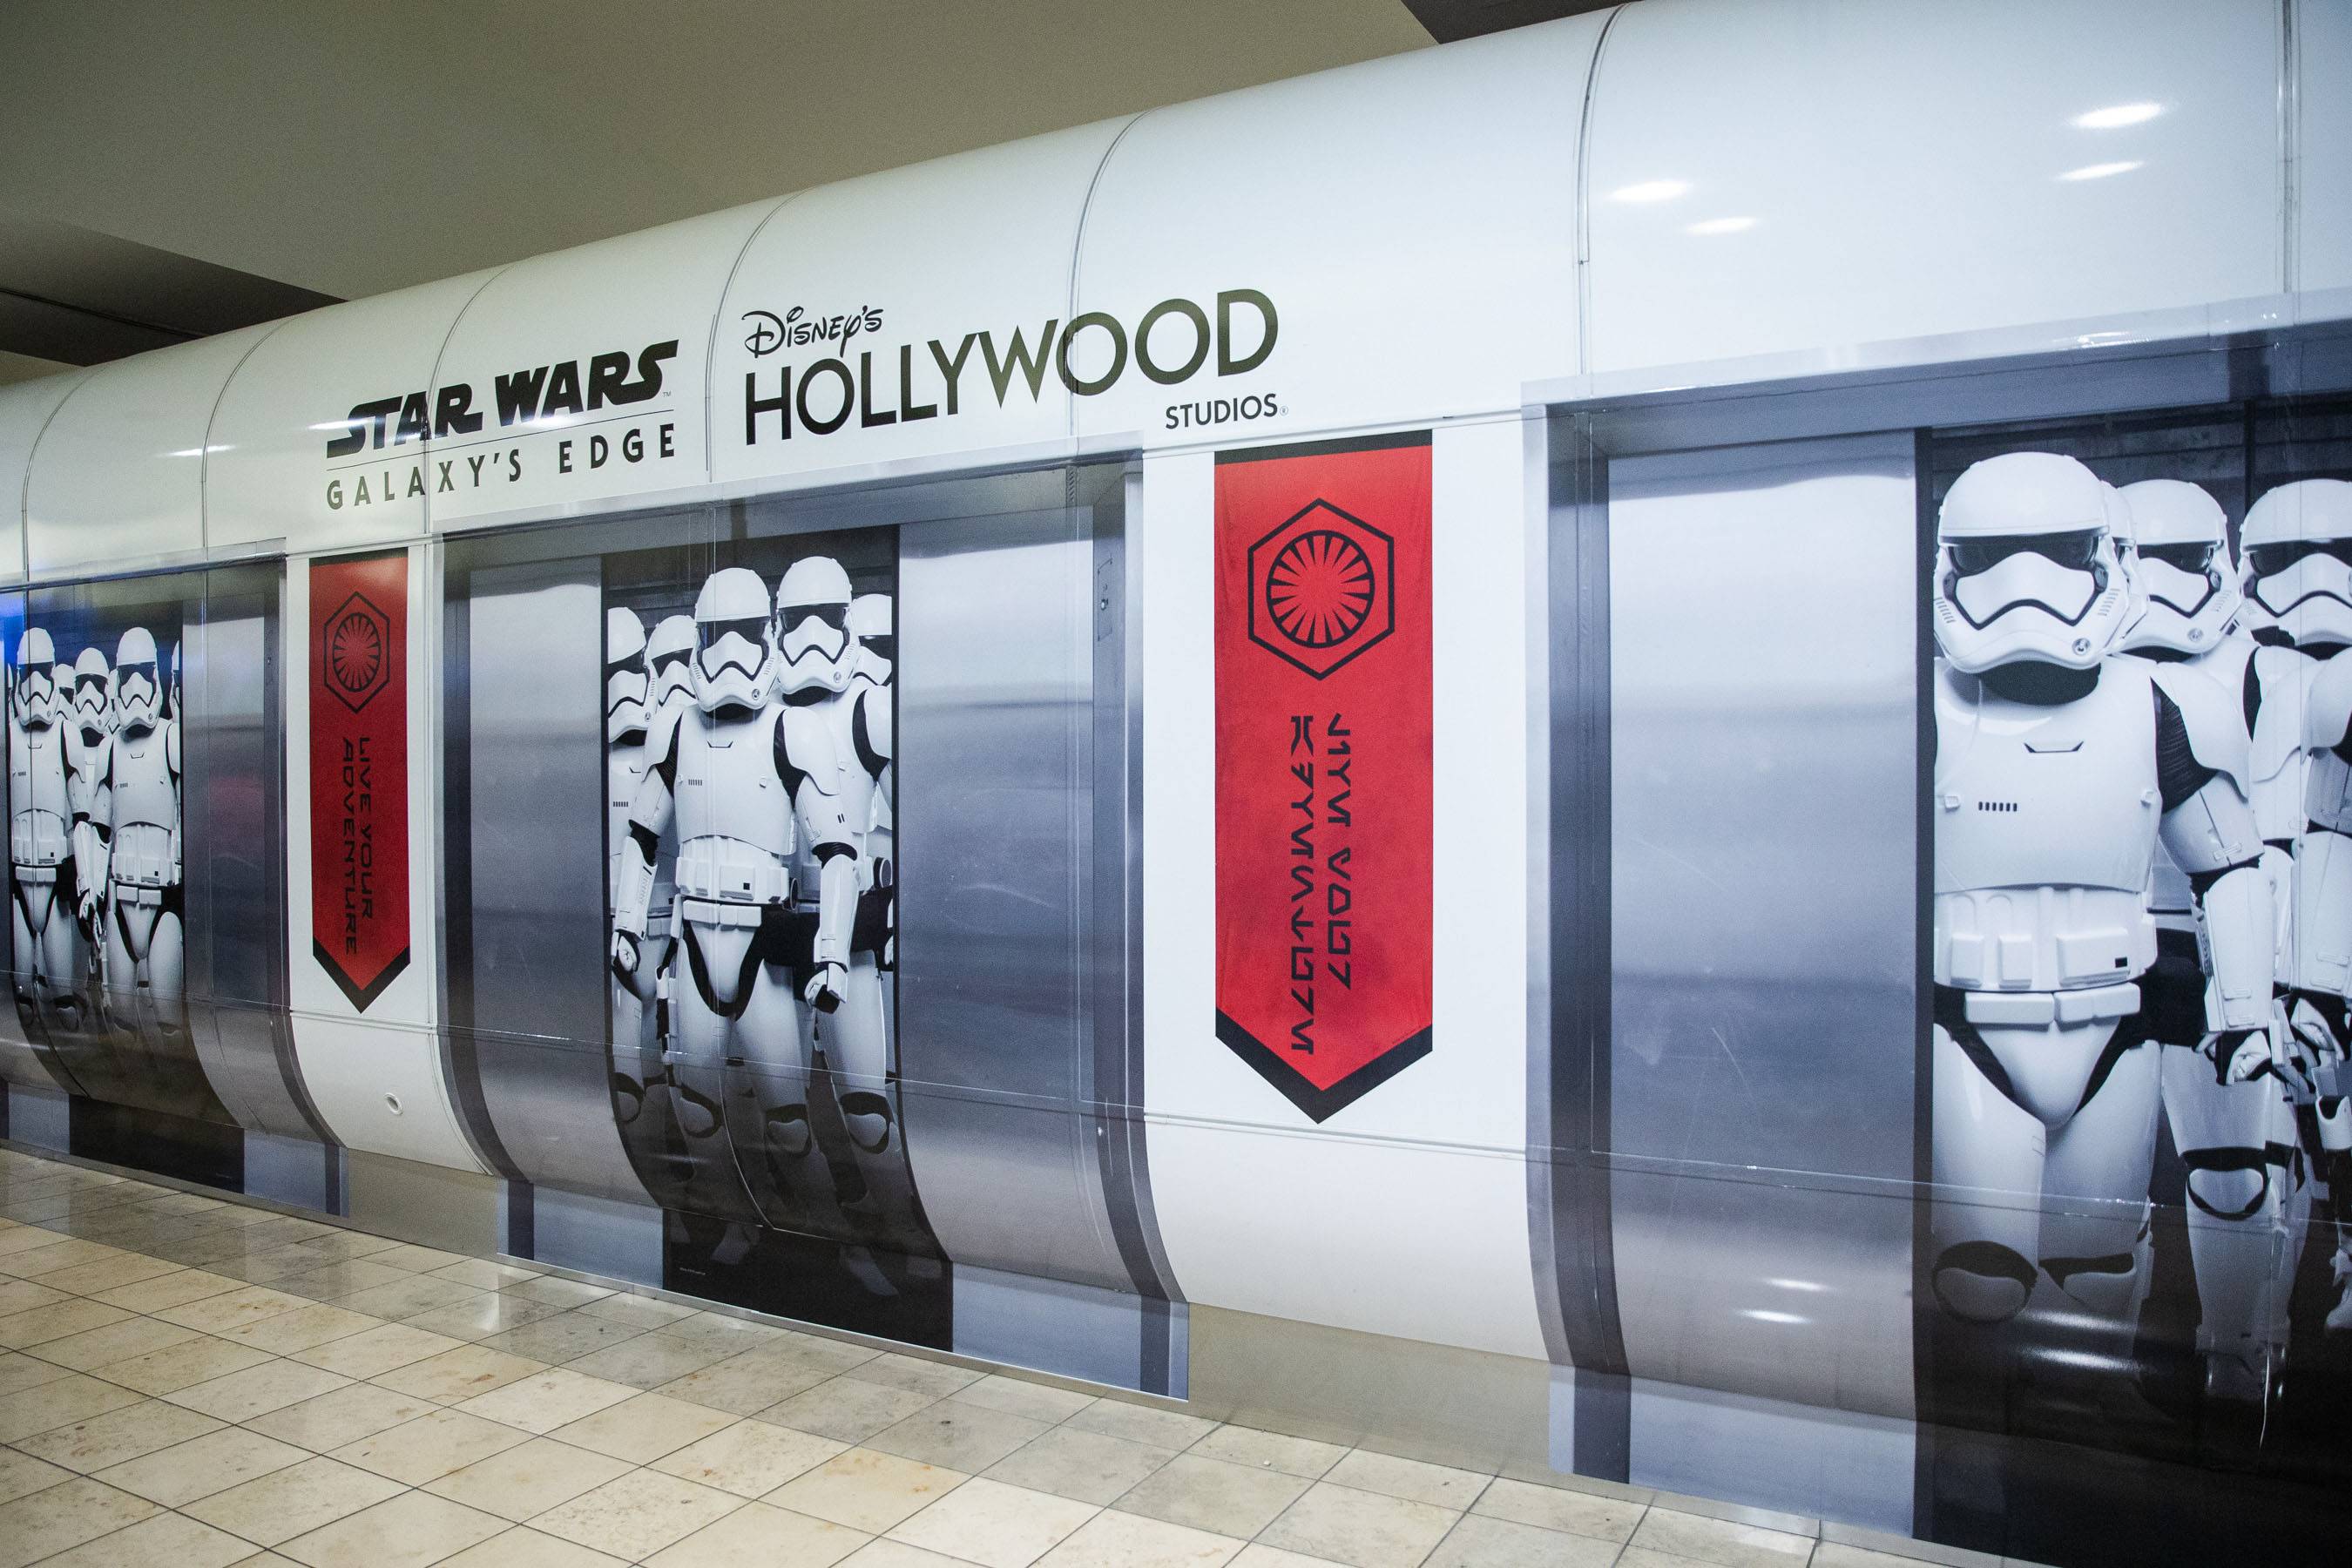 PHOTOS - Travelers arriving at Orlando International Airport get a glimpse of Star Wars Galaxy's Edge